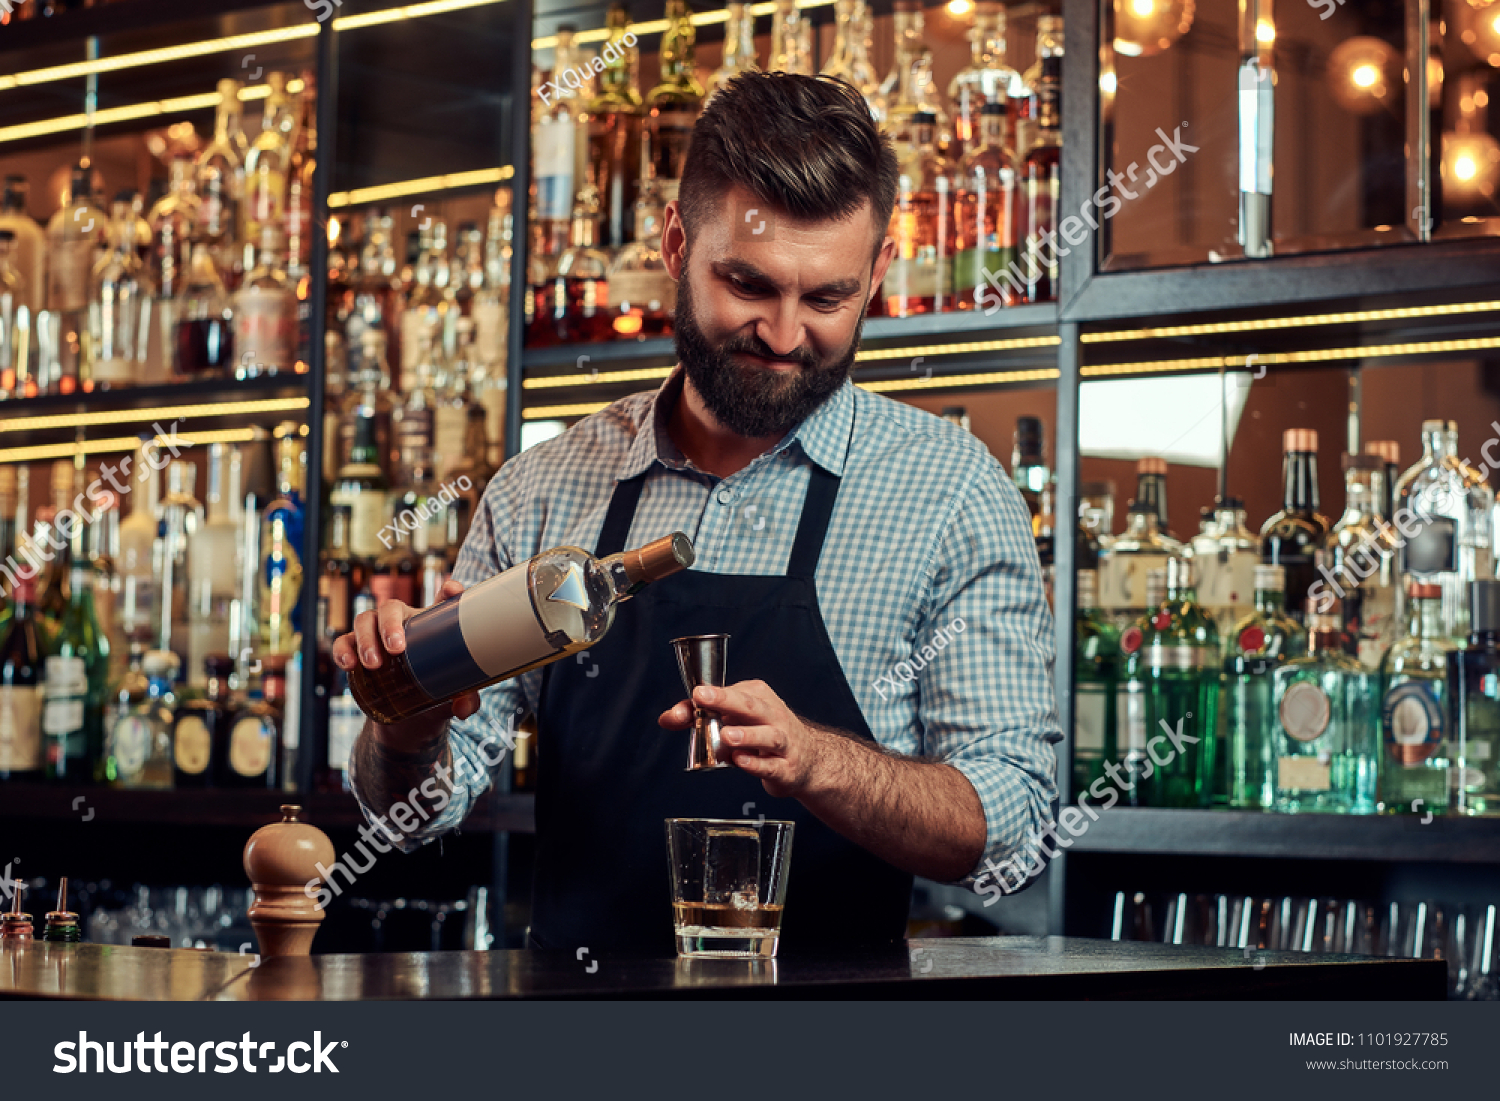 Stylish brutal barman in a shirt and apron makes a cocktail at bar counter background. #1101927785